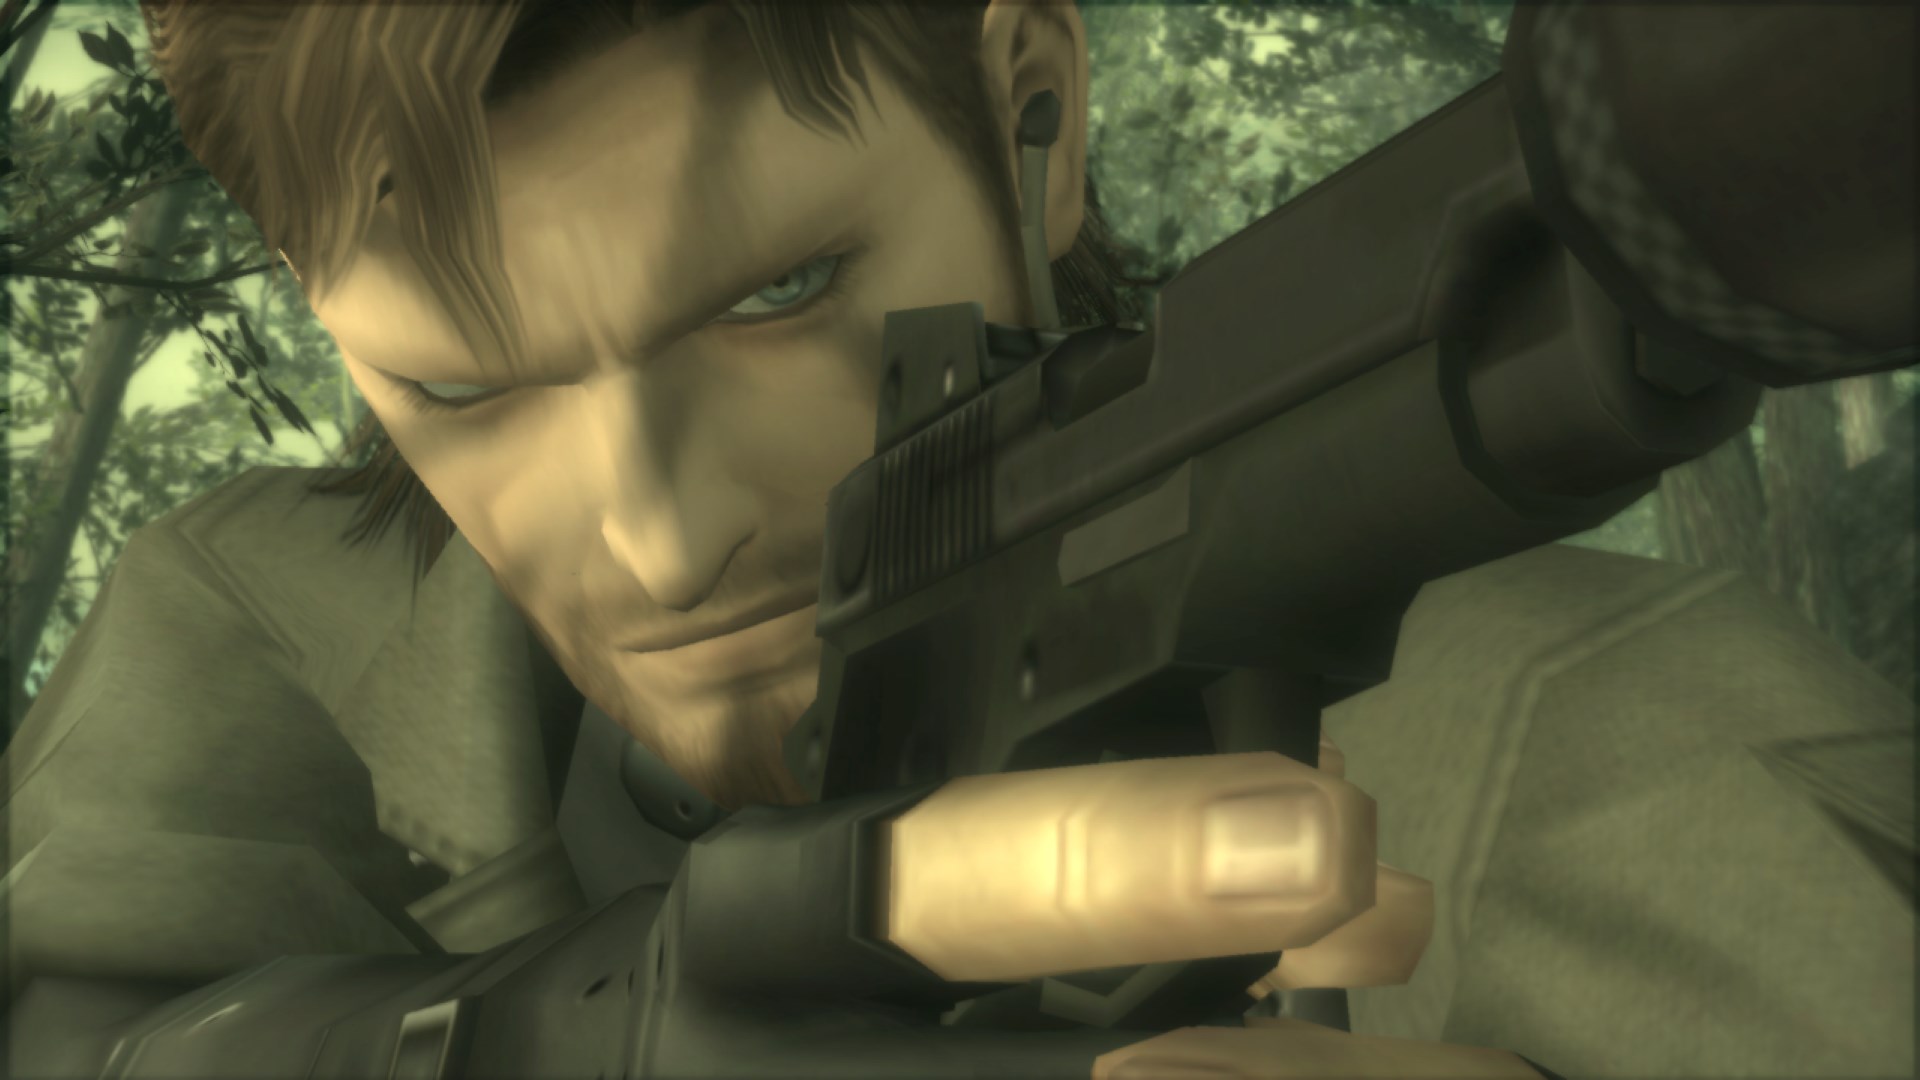 metal gear solid hd collection microsoft store